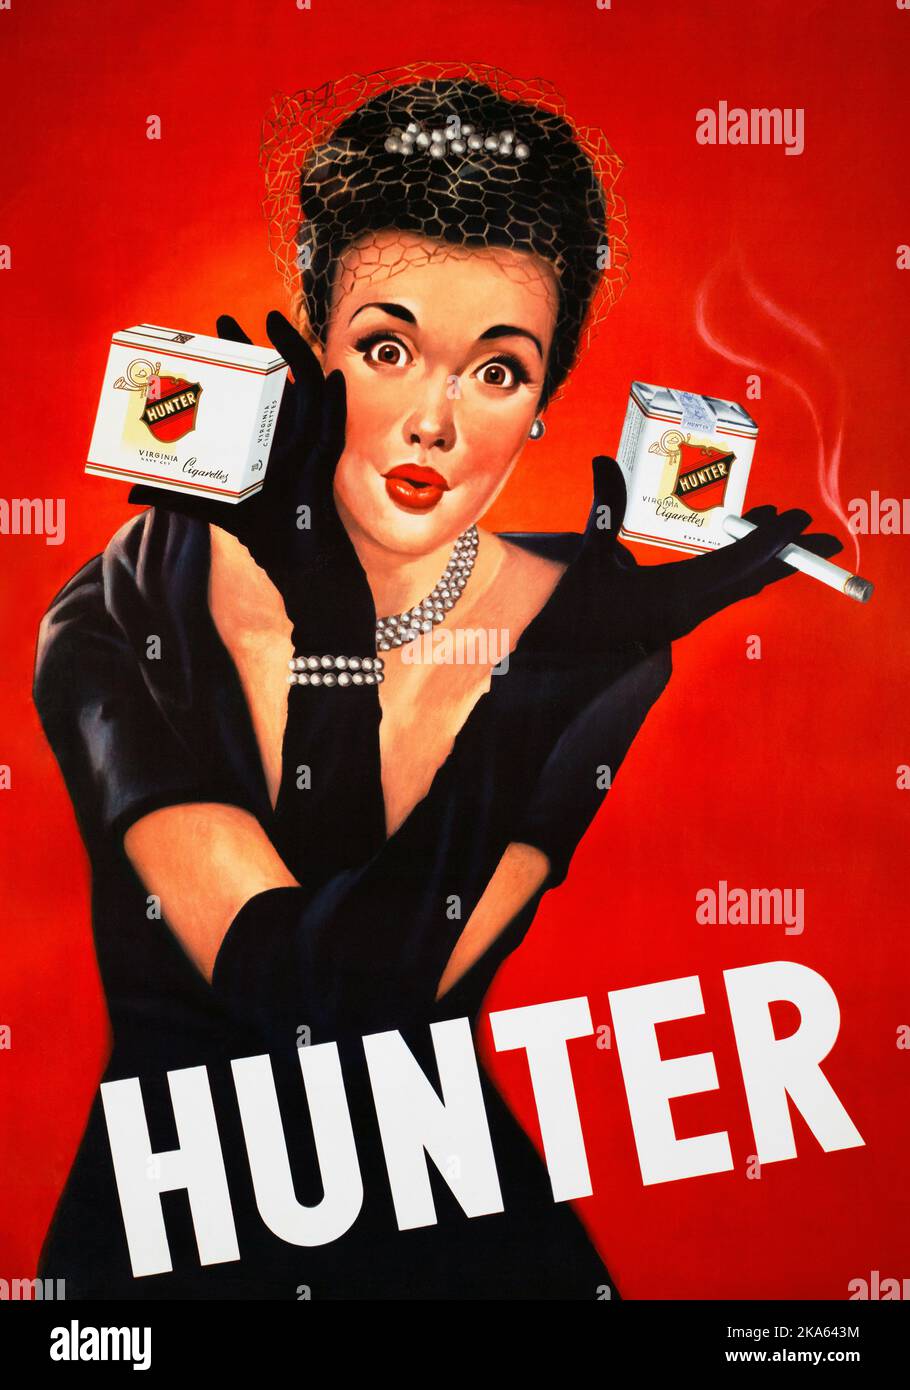 Hunter. Artist unknown. Poster published in the 1950s in the UK. Stock Photo